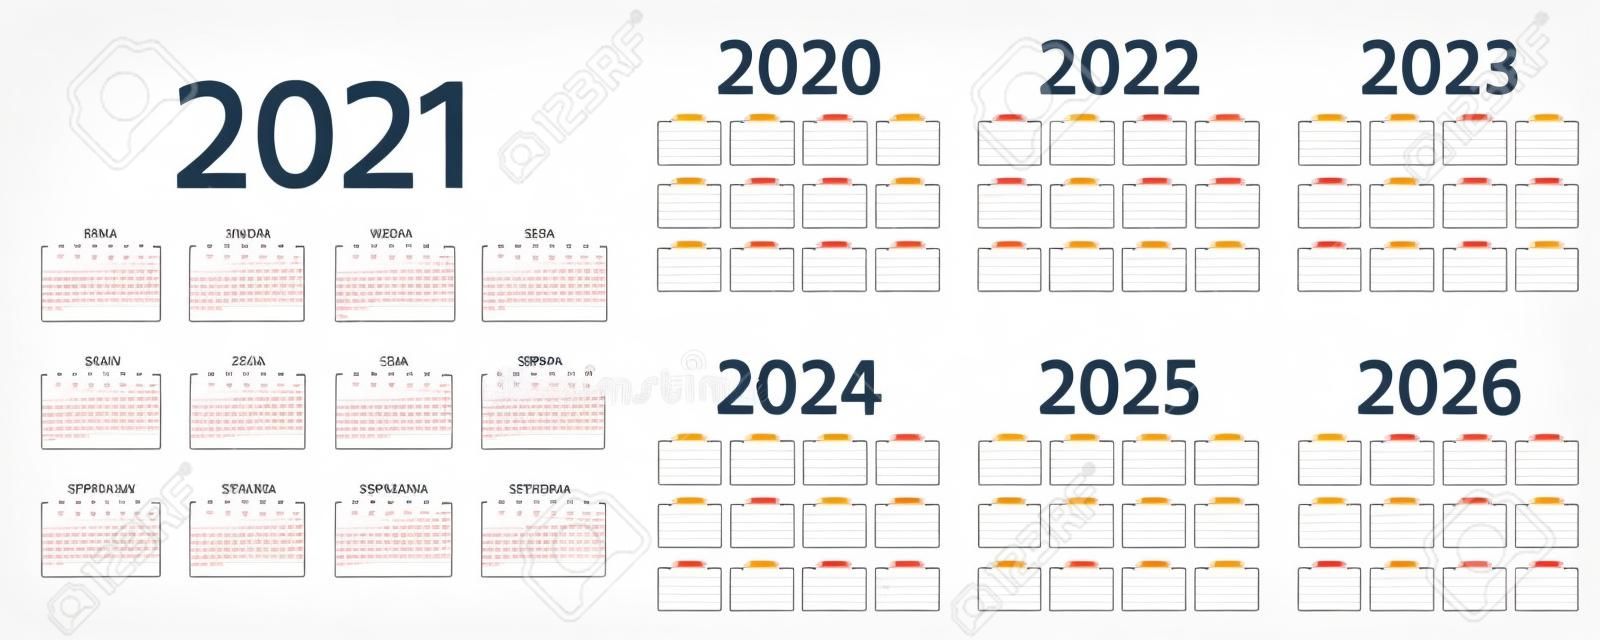 Spanish Calendar 2021, 2022, 2023, 2024, 2025, 2026, 2020 years. Vector. Week starts Monday. Spain calender template. Yearly stationery organizer in simple design. Simple illustration.